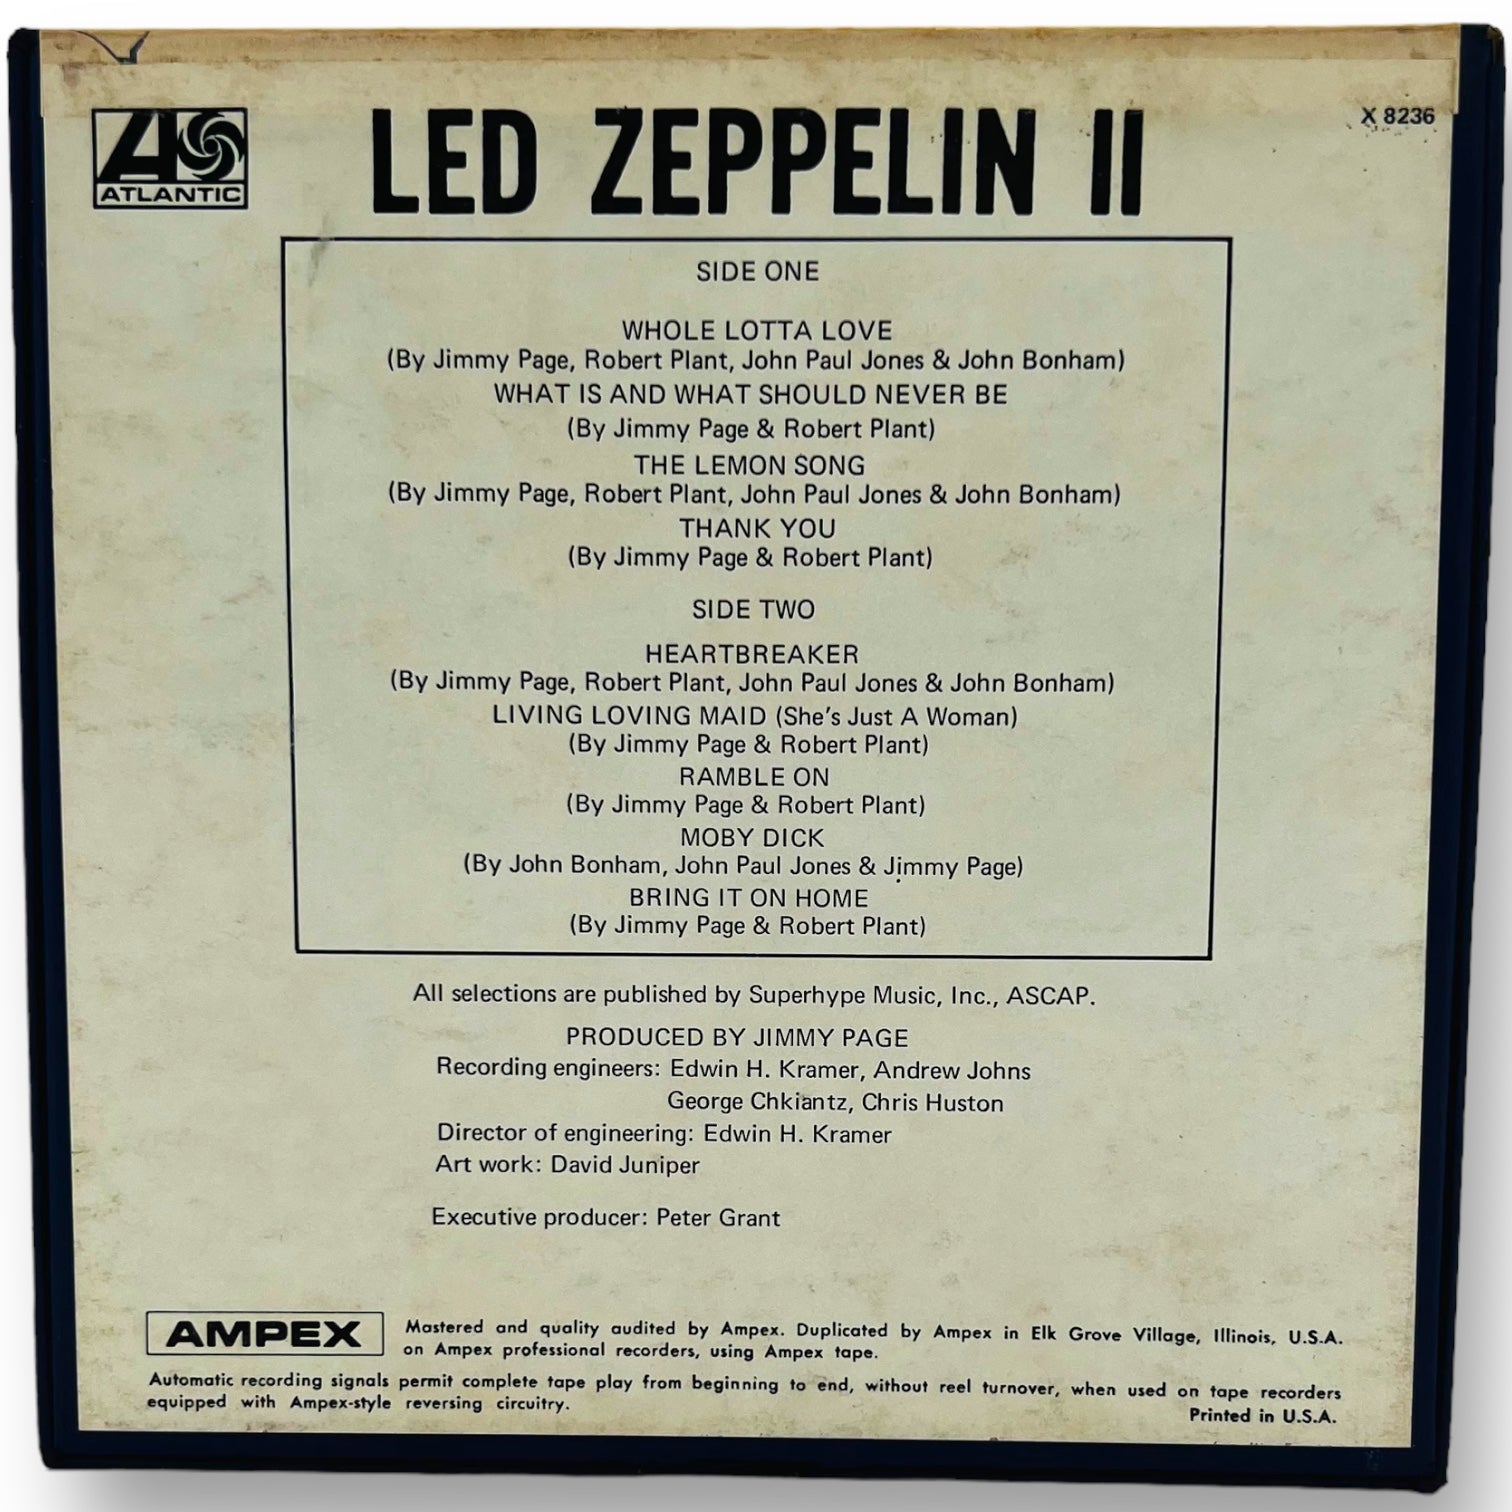 Led Zeppelin II The Only Way To Fly Reel to Reel Tape 3 3/4 IPS Atlant –  Soundtrack Hi-Fi